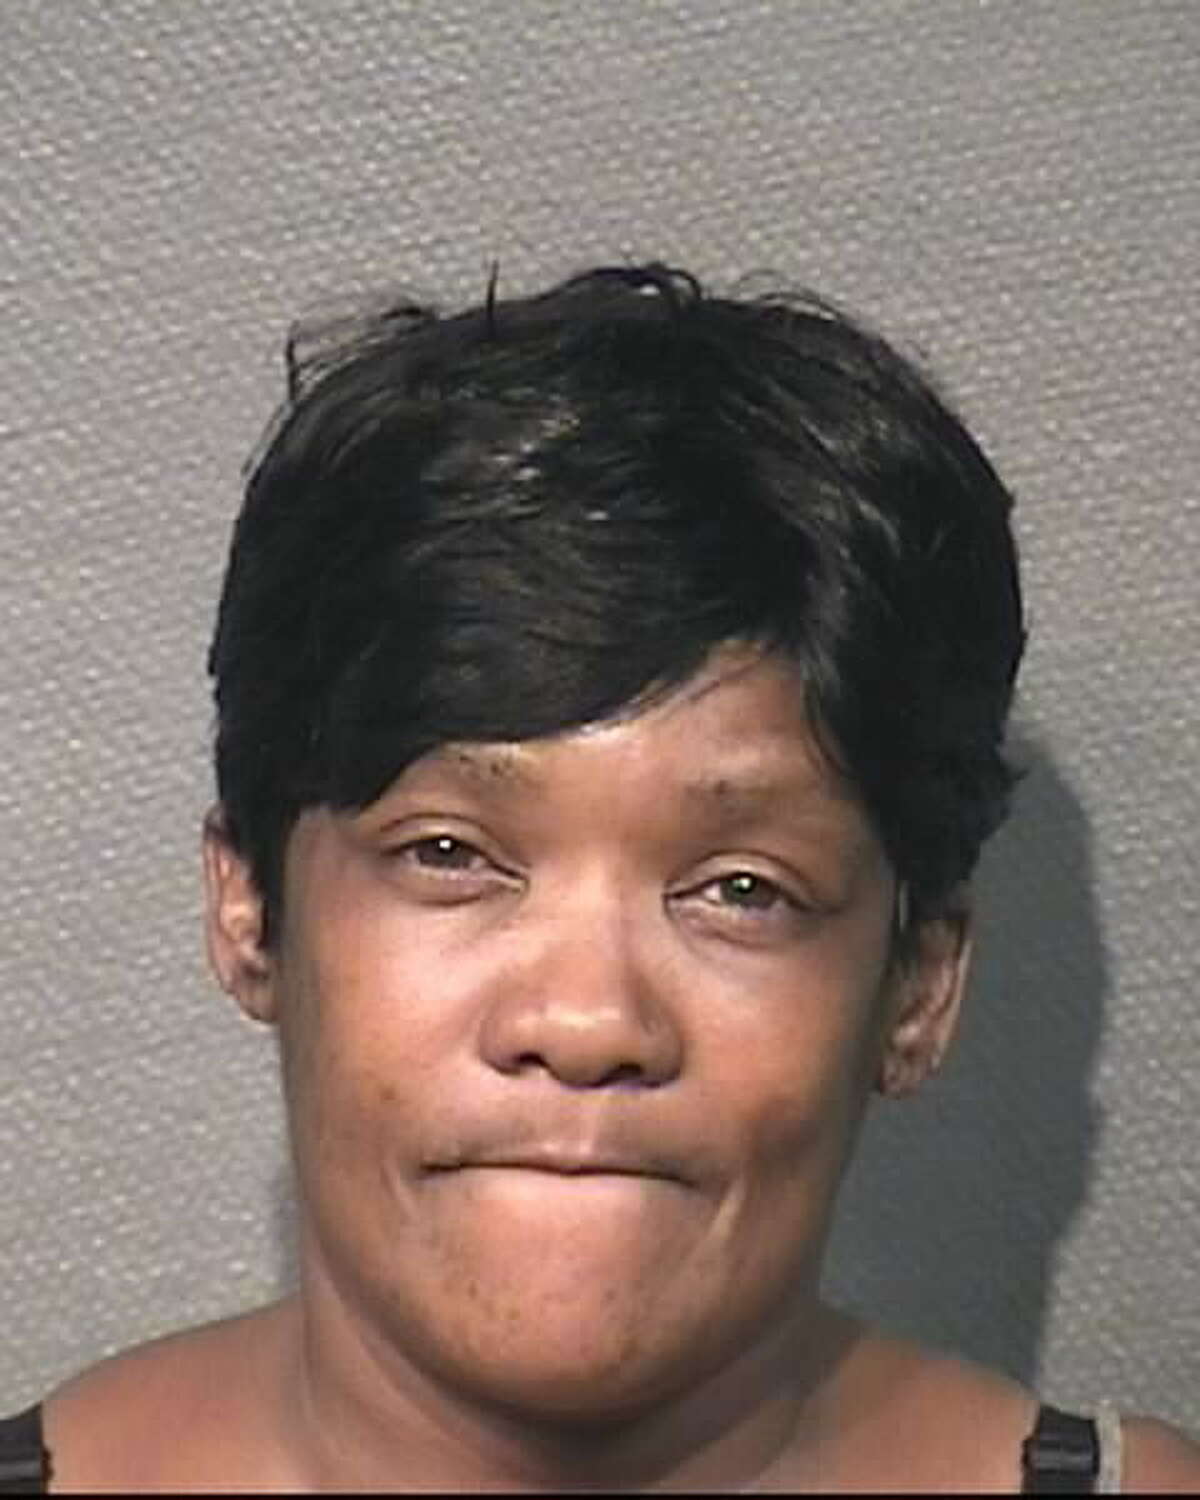 Regina Banks has been charged with aggravated assault with a deadly weapon after attacking a woman on Monday with a hammer, according to the Houston Police Department.